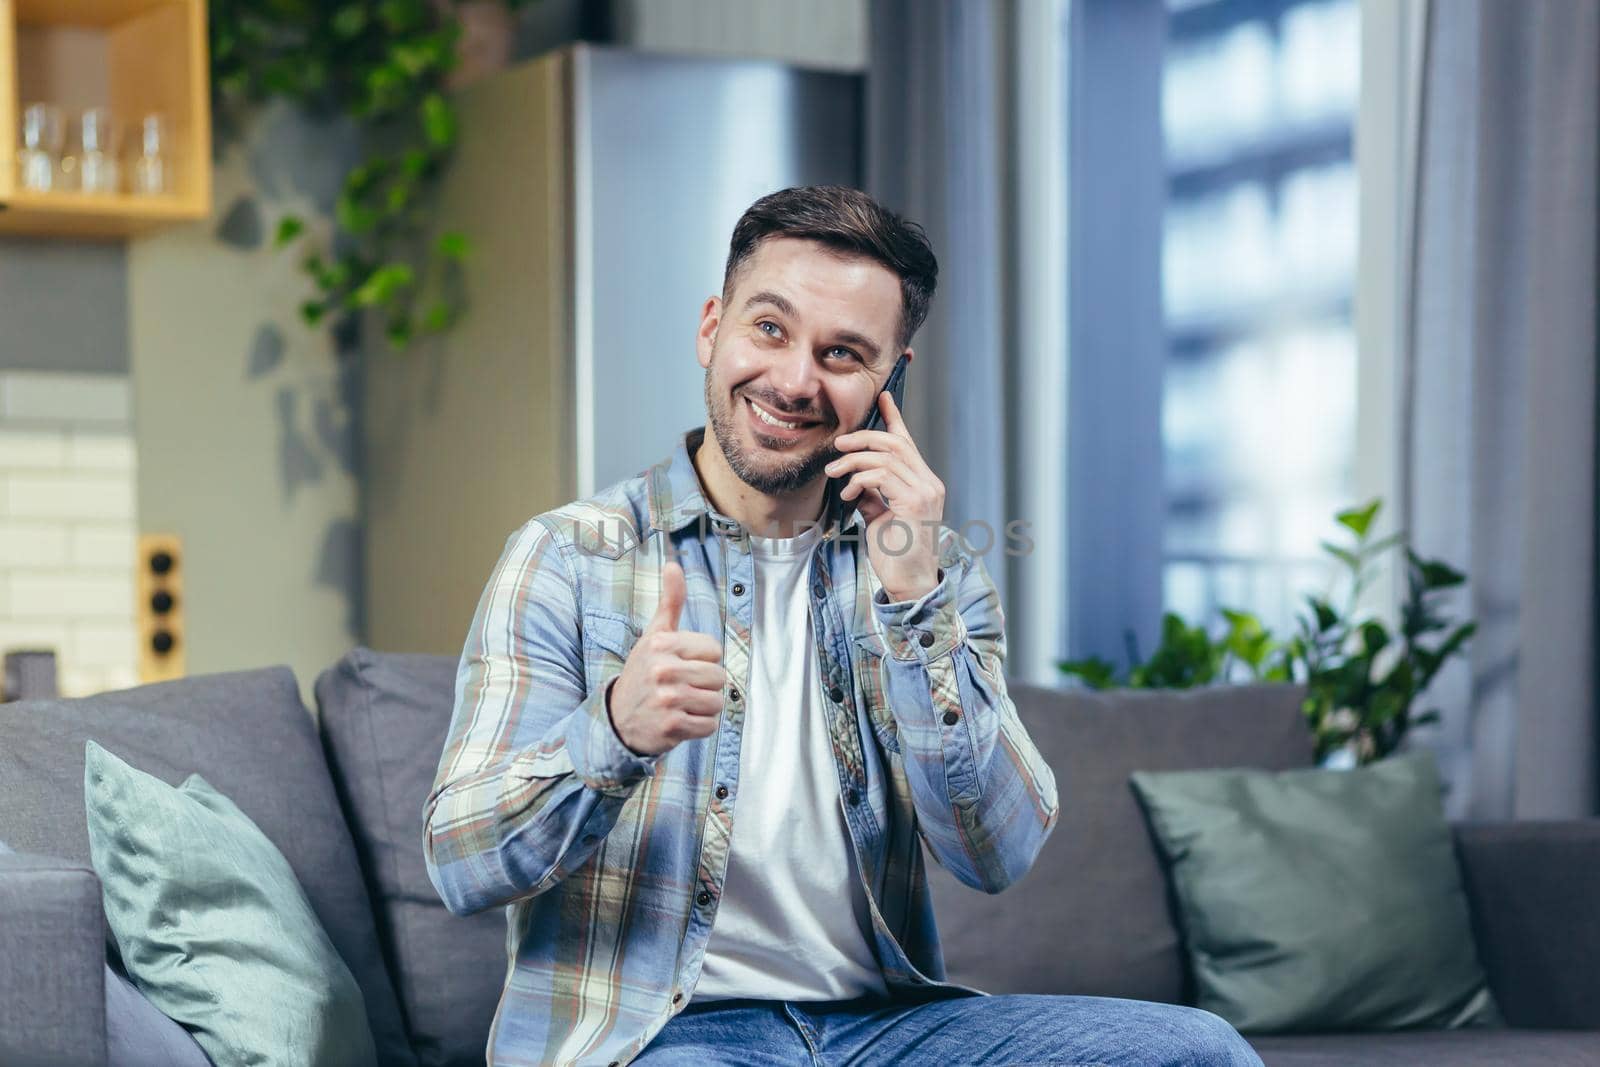 Happy and cheerful man at home sitting on the couch smiling and talking on the phone by voronaman